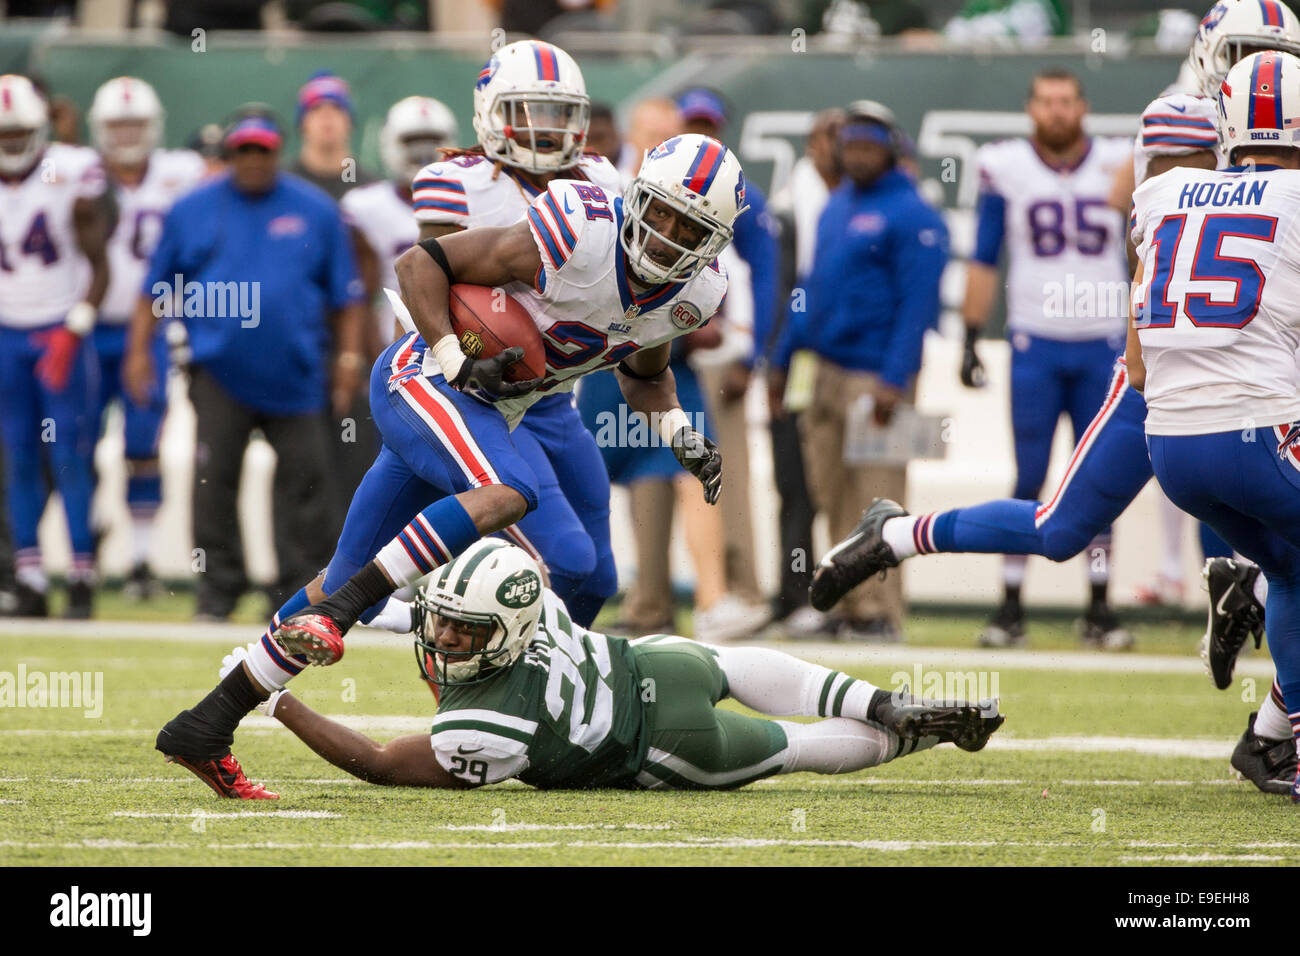 East Rutherford, New Jersey, USA. 26th Oct, 2014. Buffalo Bills cornerback Leodis McKelvin (21) runs back the kick as he gets past New York Jets running back Bilal Powell (29) during the NFL game between the Buffalo Bills and the New York Jets at MetLife Stadium in East Rutherford, New Jersey. The Bills won 43-23. (Christopher Szagola/Cal Sport Media) Stock Photo